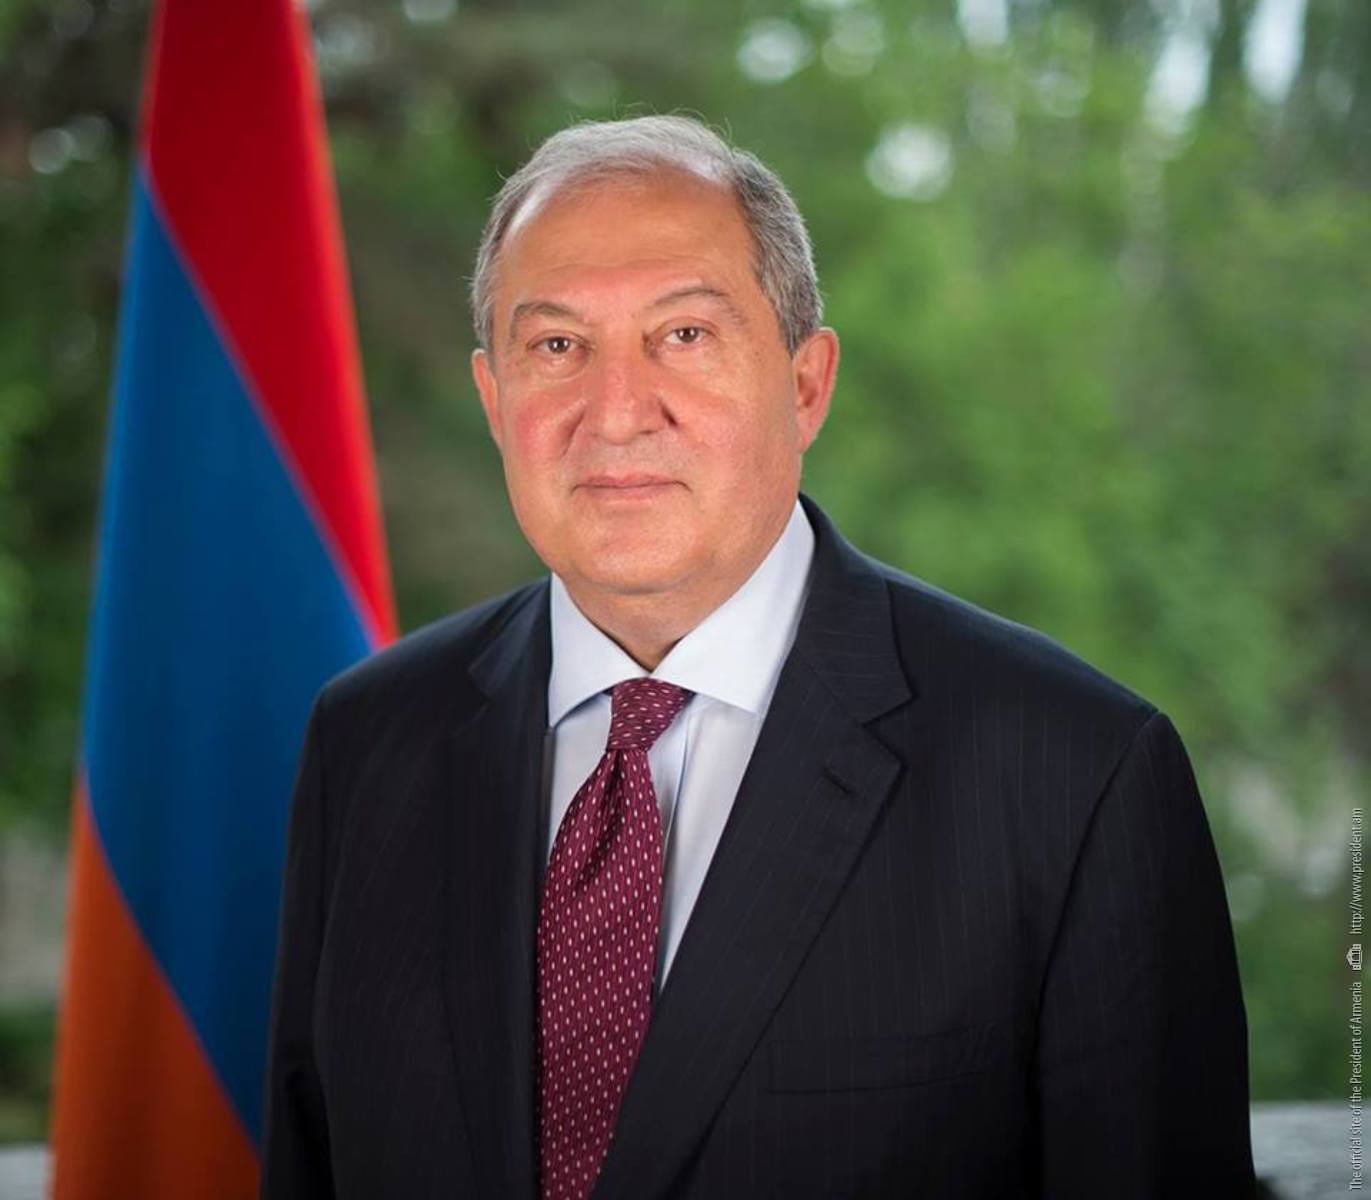 President Sarkissian rejects proposal to dismiss Chief of the General Staff, returns the motion with objections - The US Armenians